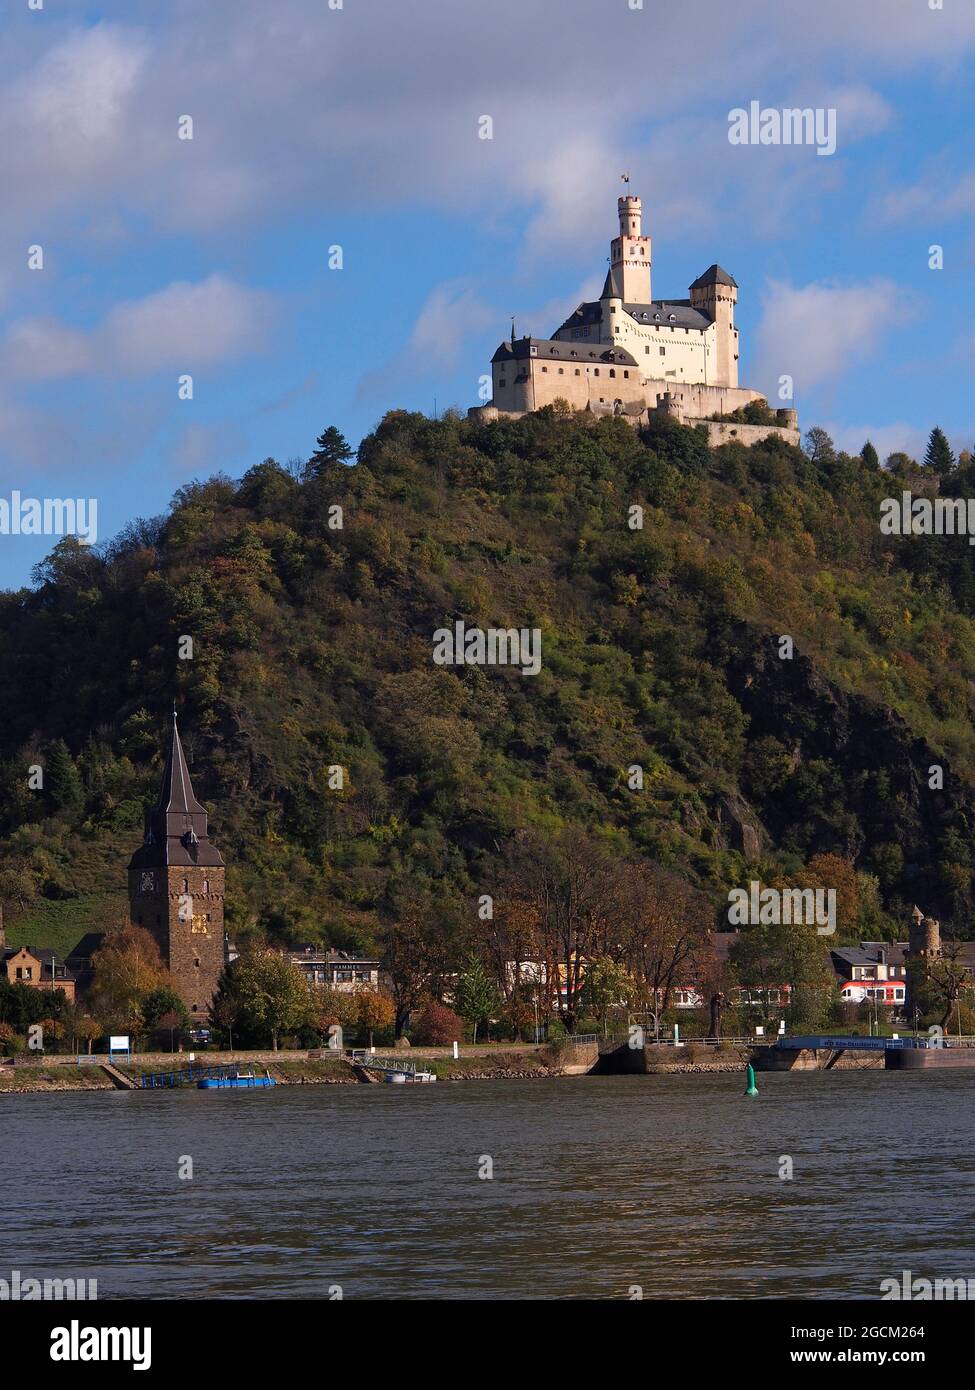 The Marksburg is a castle above the town of Braubach in Rhineland-Palatinate, German Stock Photo